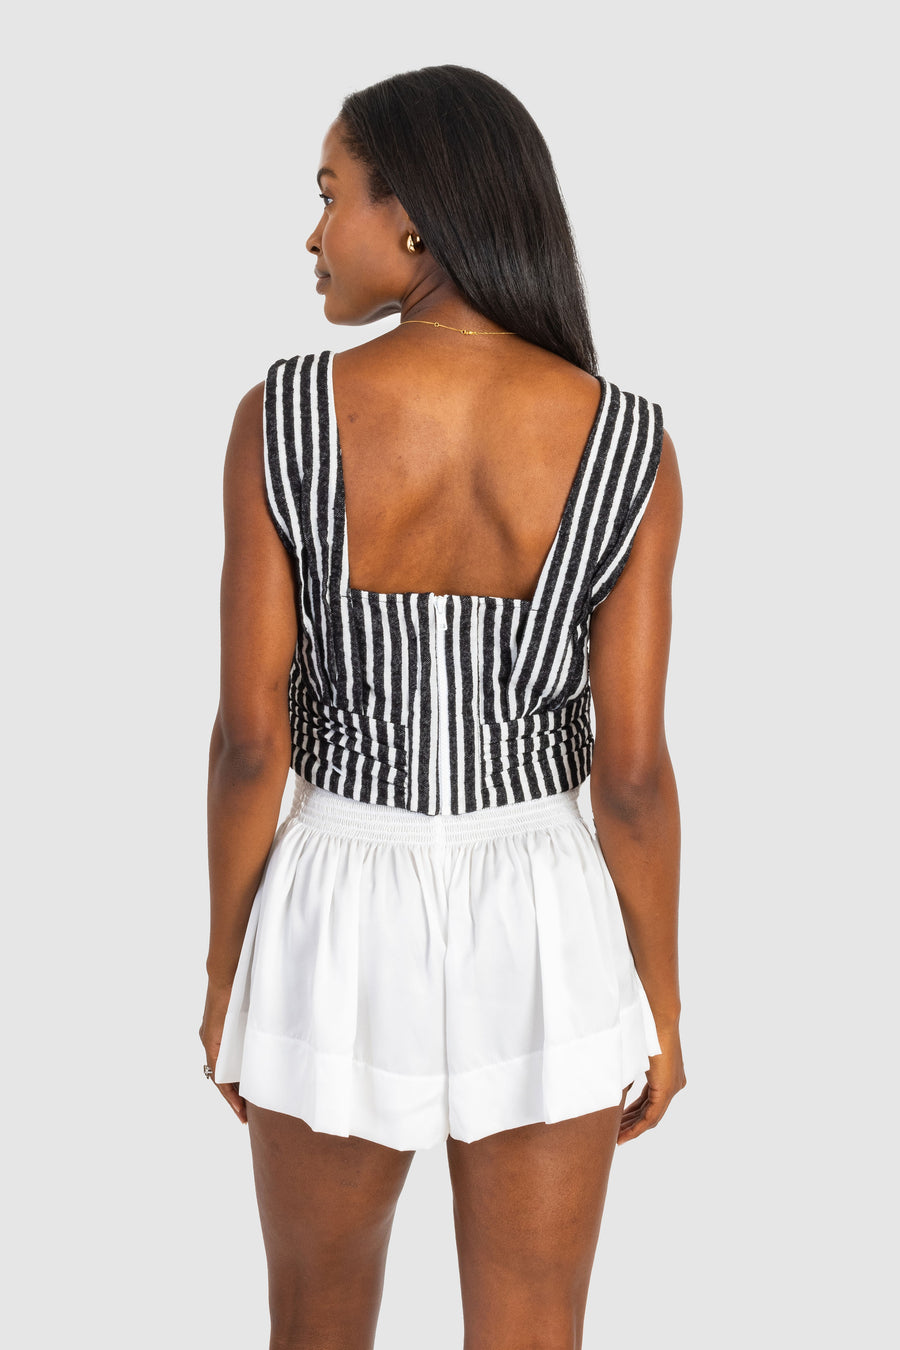 Tina Top Navy French Stripe *Limited*Edition*